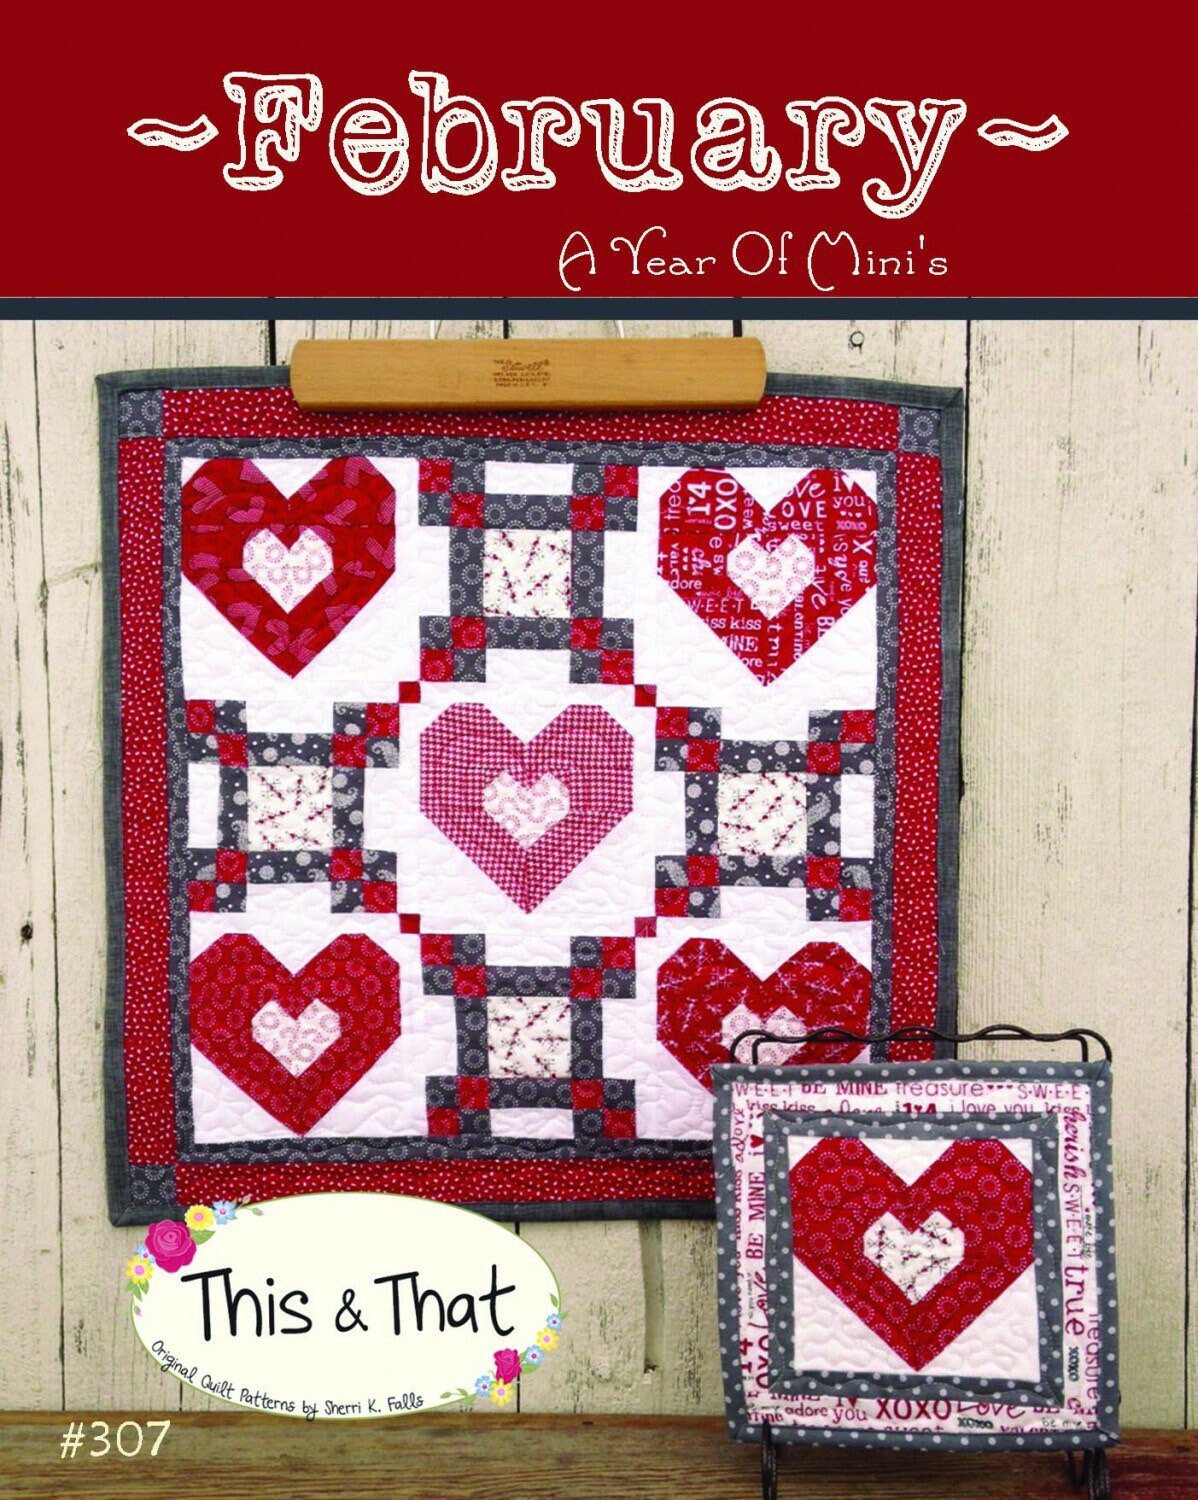 Year of Mini February Mini Quilt Pattern - This & That - Sherri Falls - Heart Quilt Pattern - Valentines Day Quilt Pattern